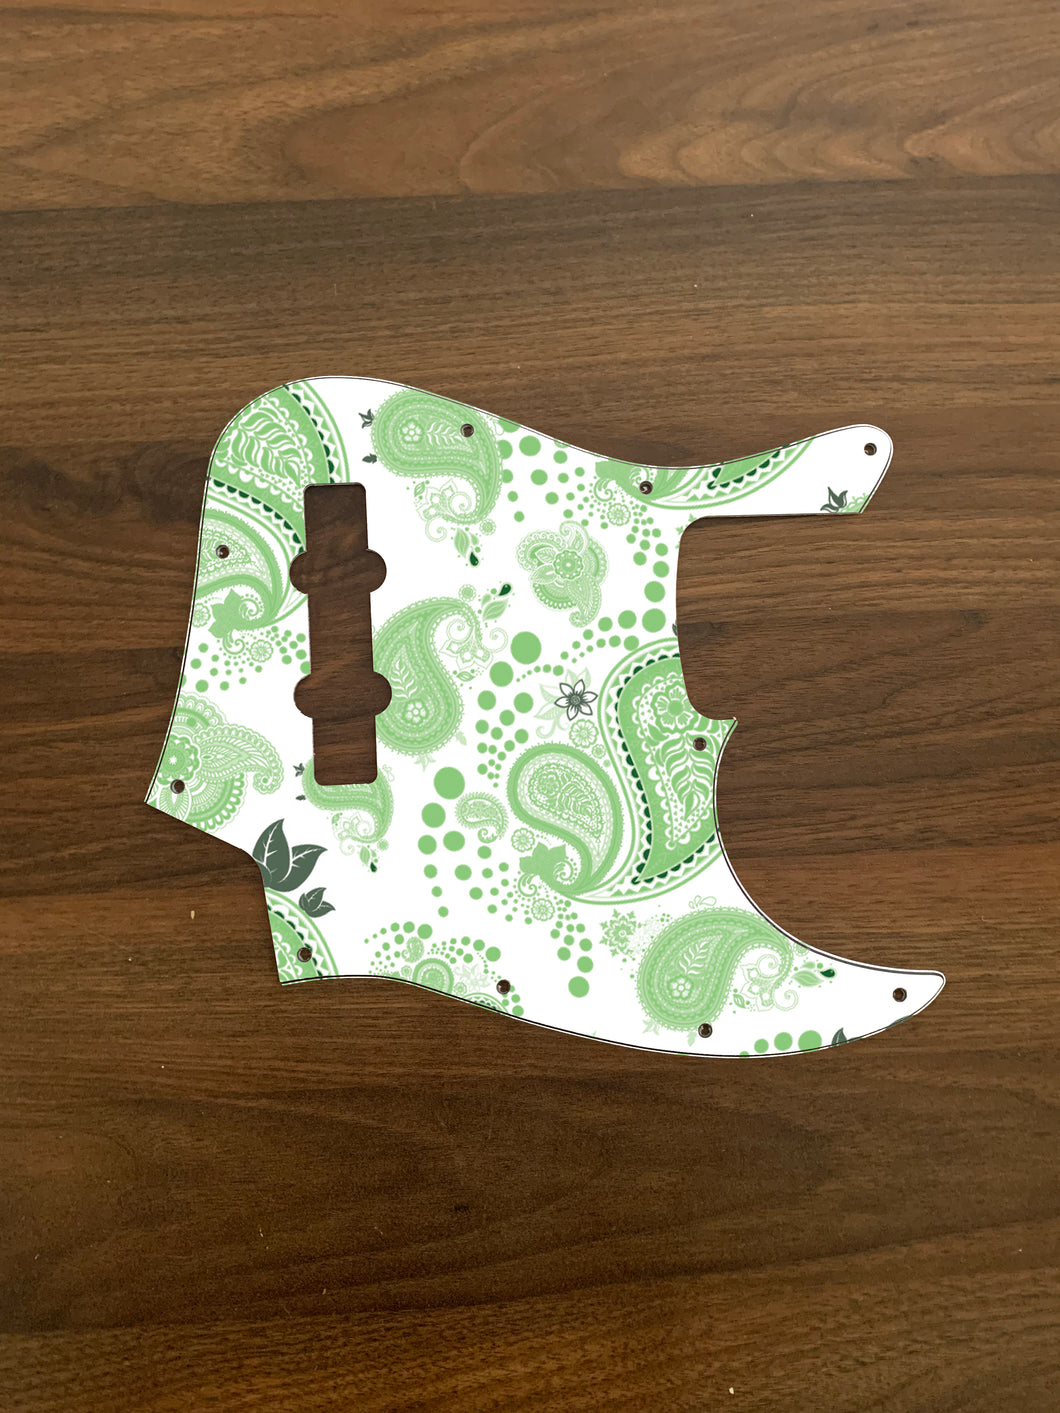 Green and White-Paisley Jazz Bass Pickguard by Carmedon